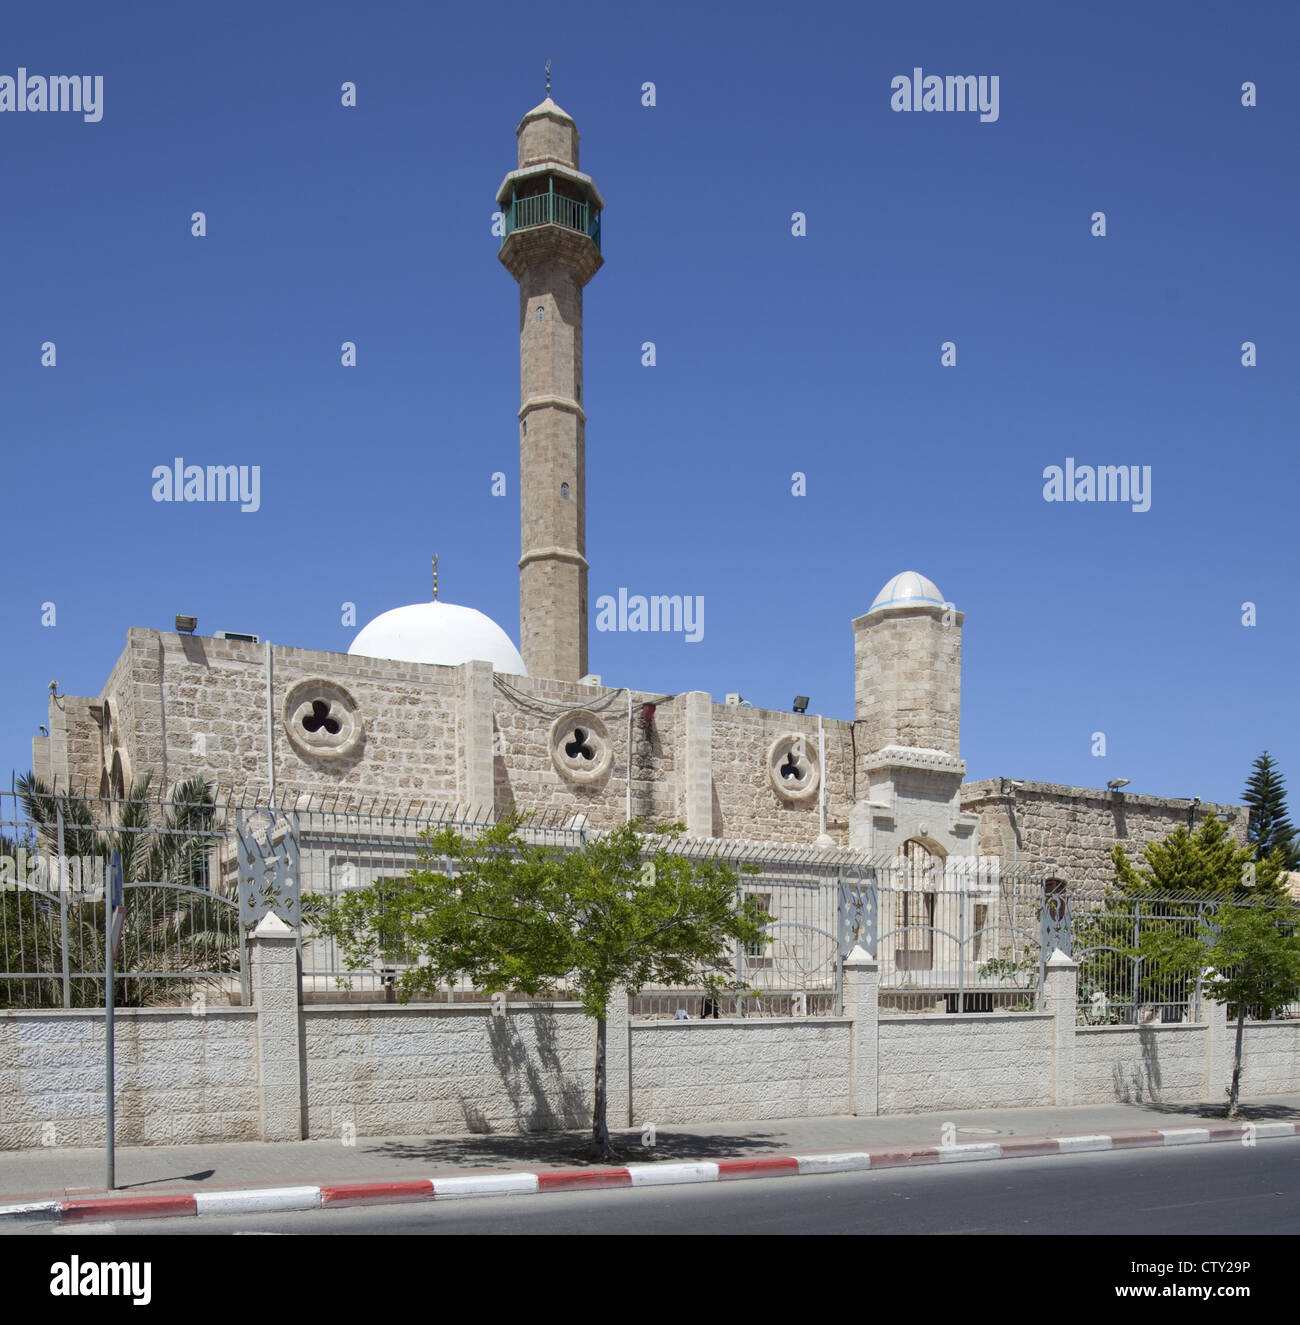 The Hassan Bek Mosque also known as the Hasan Bey Mosque, is located in Jaffa, which is now part of the Tel Aviv-Yafo, Israel. Stock Photo